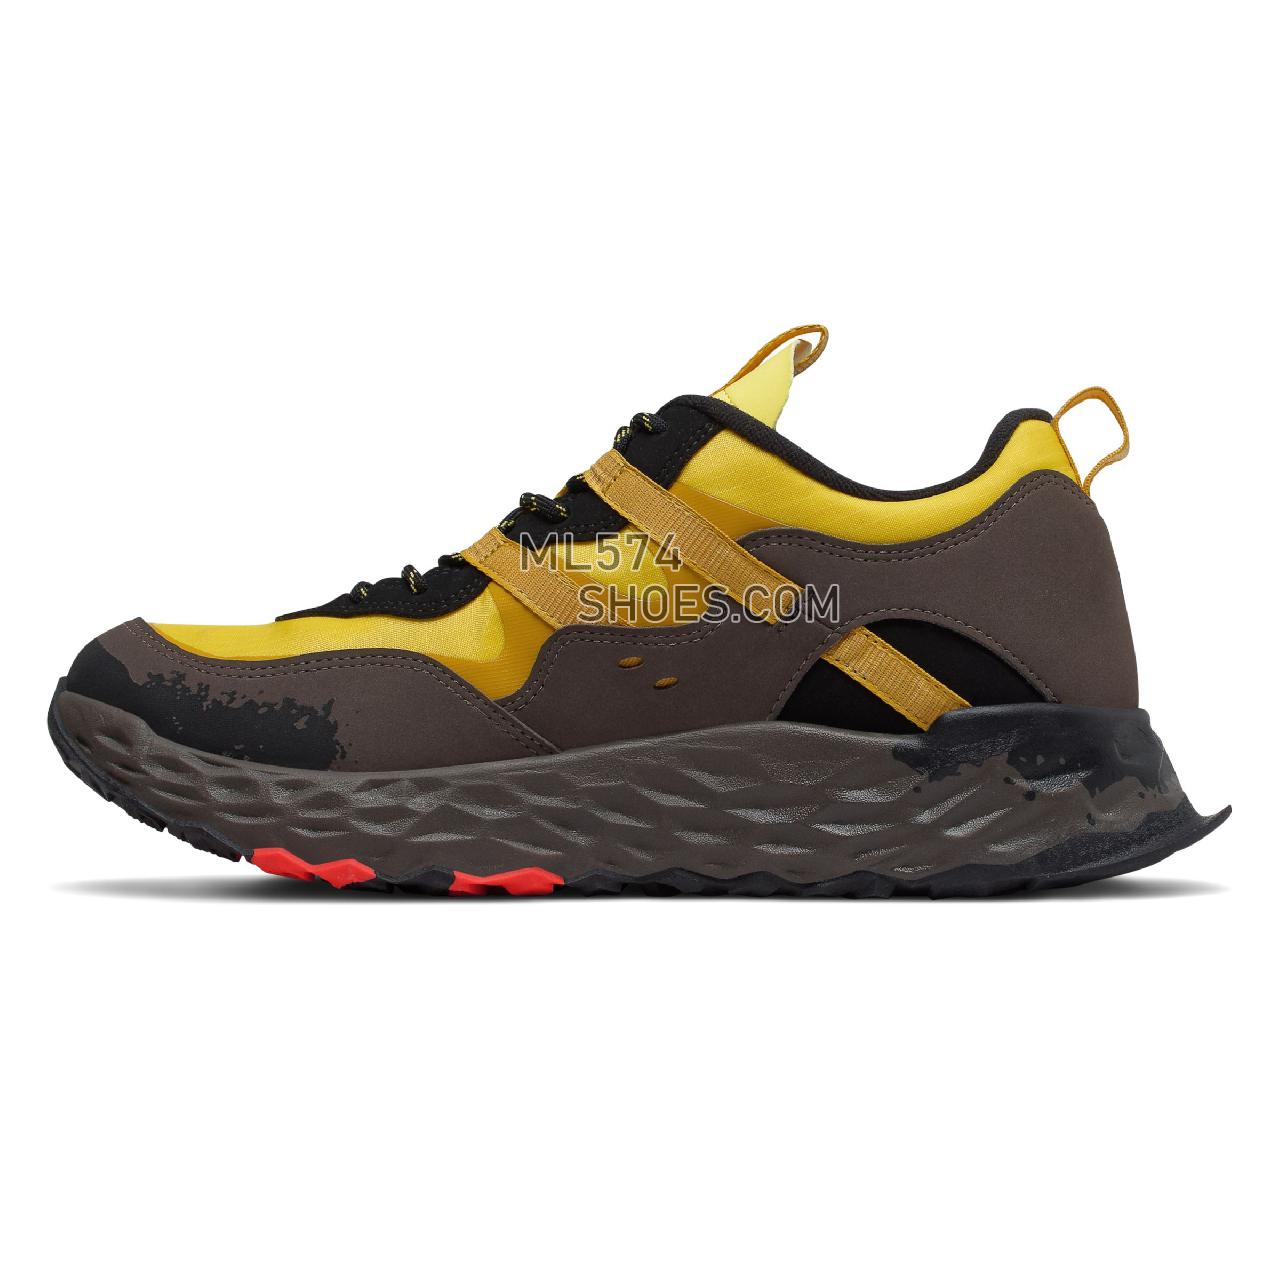 New Balance Fresh Foam 850 All Terrain - Men's Sport Style Sneakers - Atomic Yellow with Black - MS850TRF